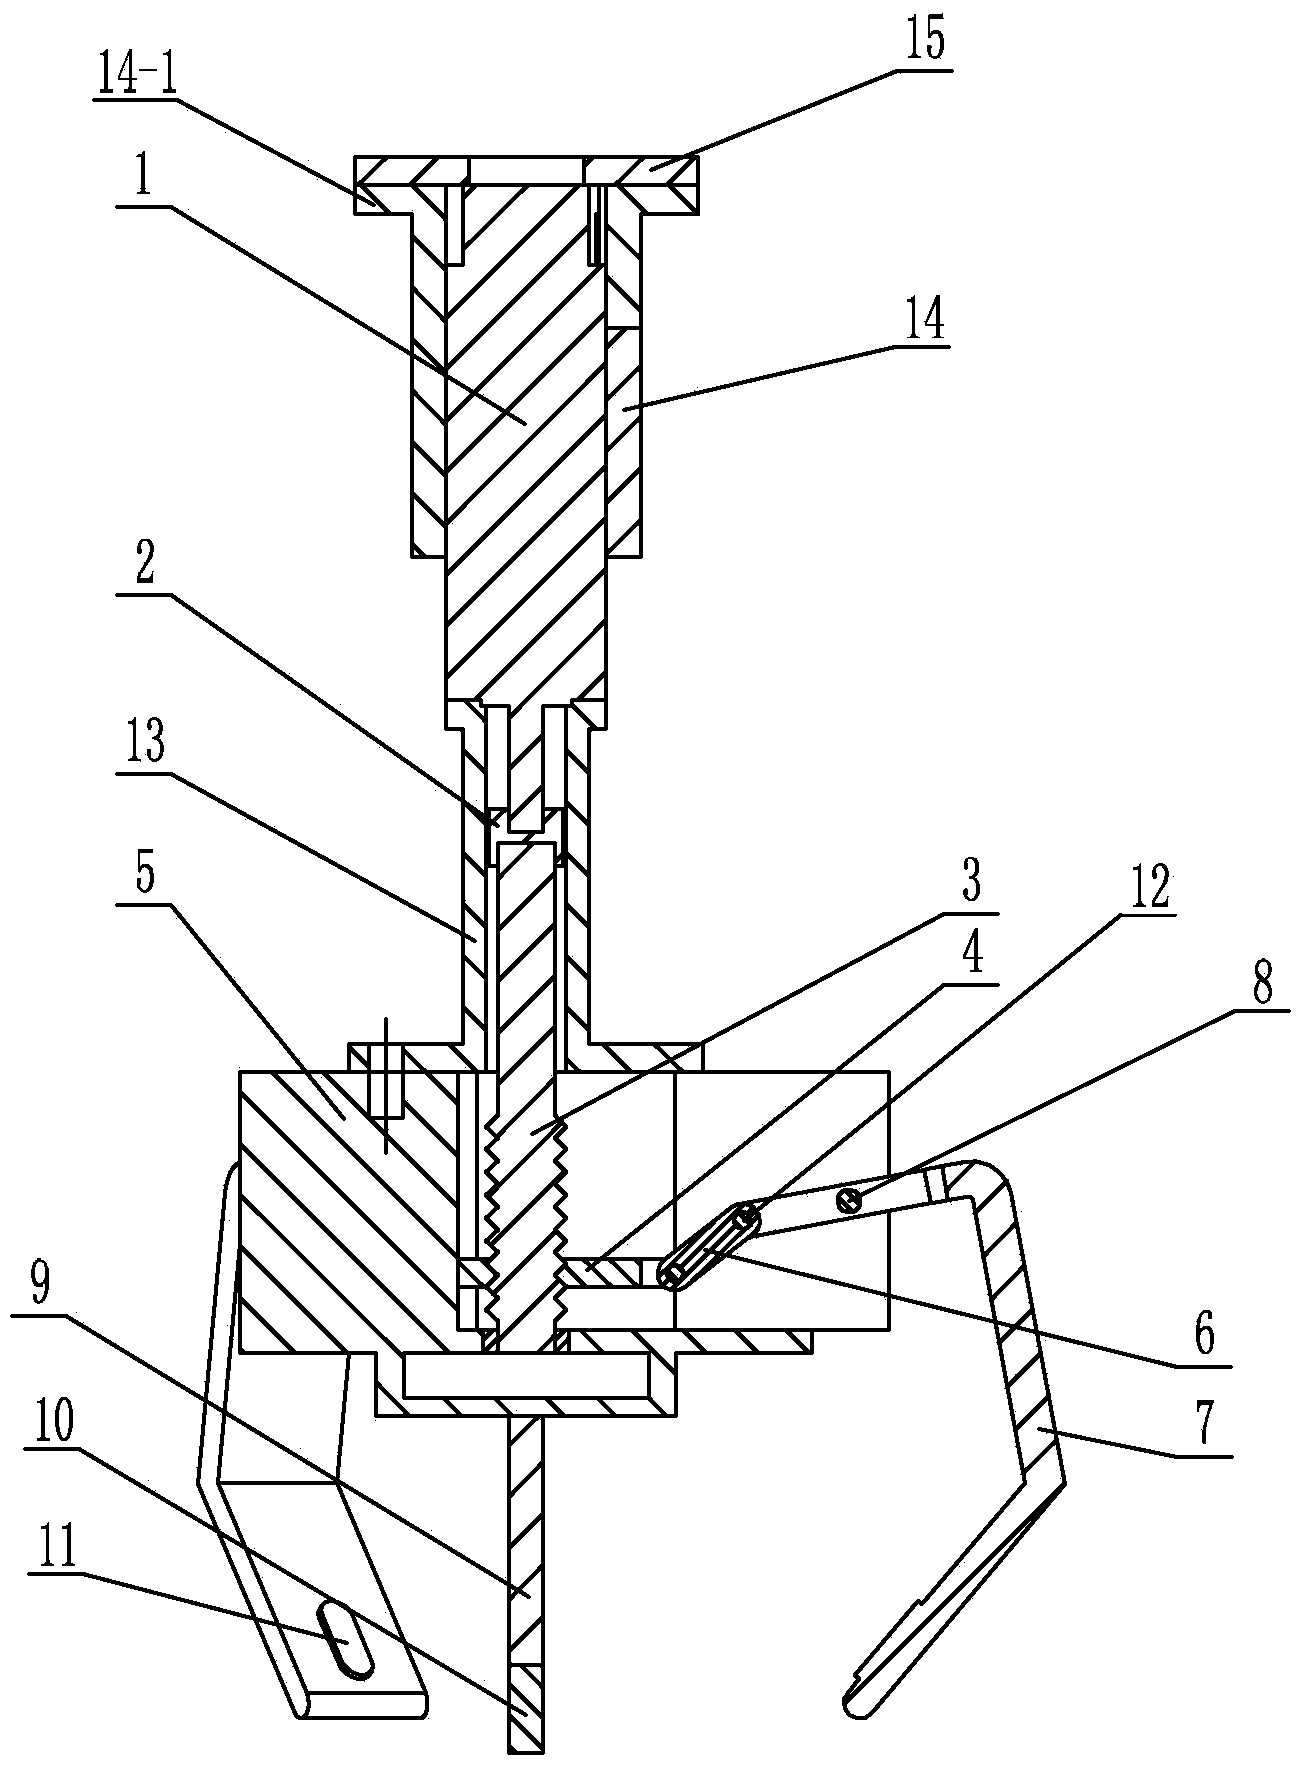 Mechanical gripper with three-finger structure